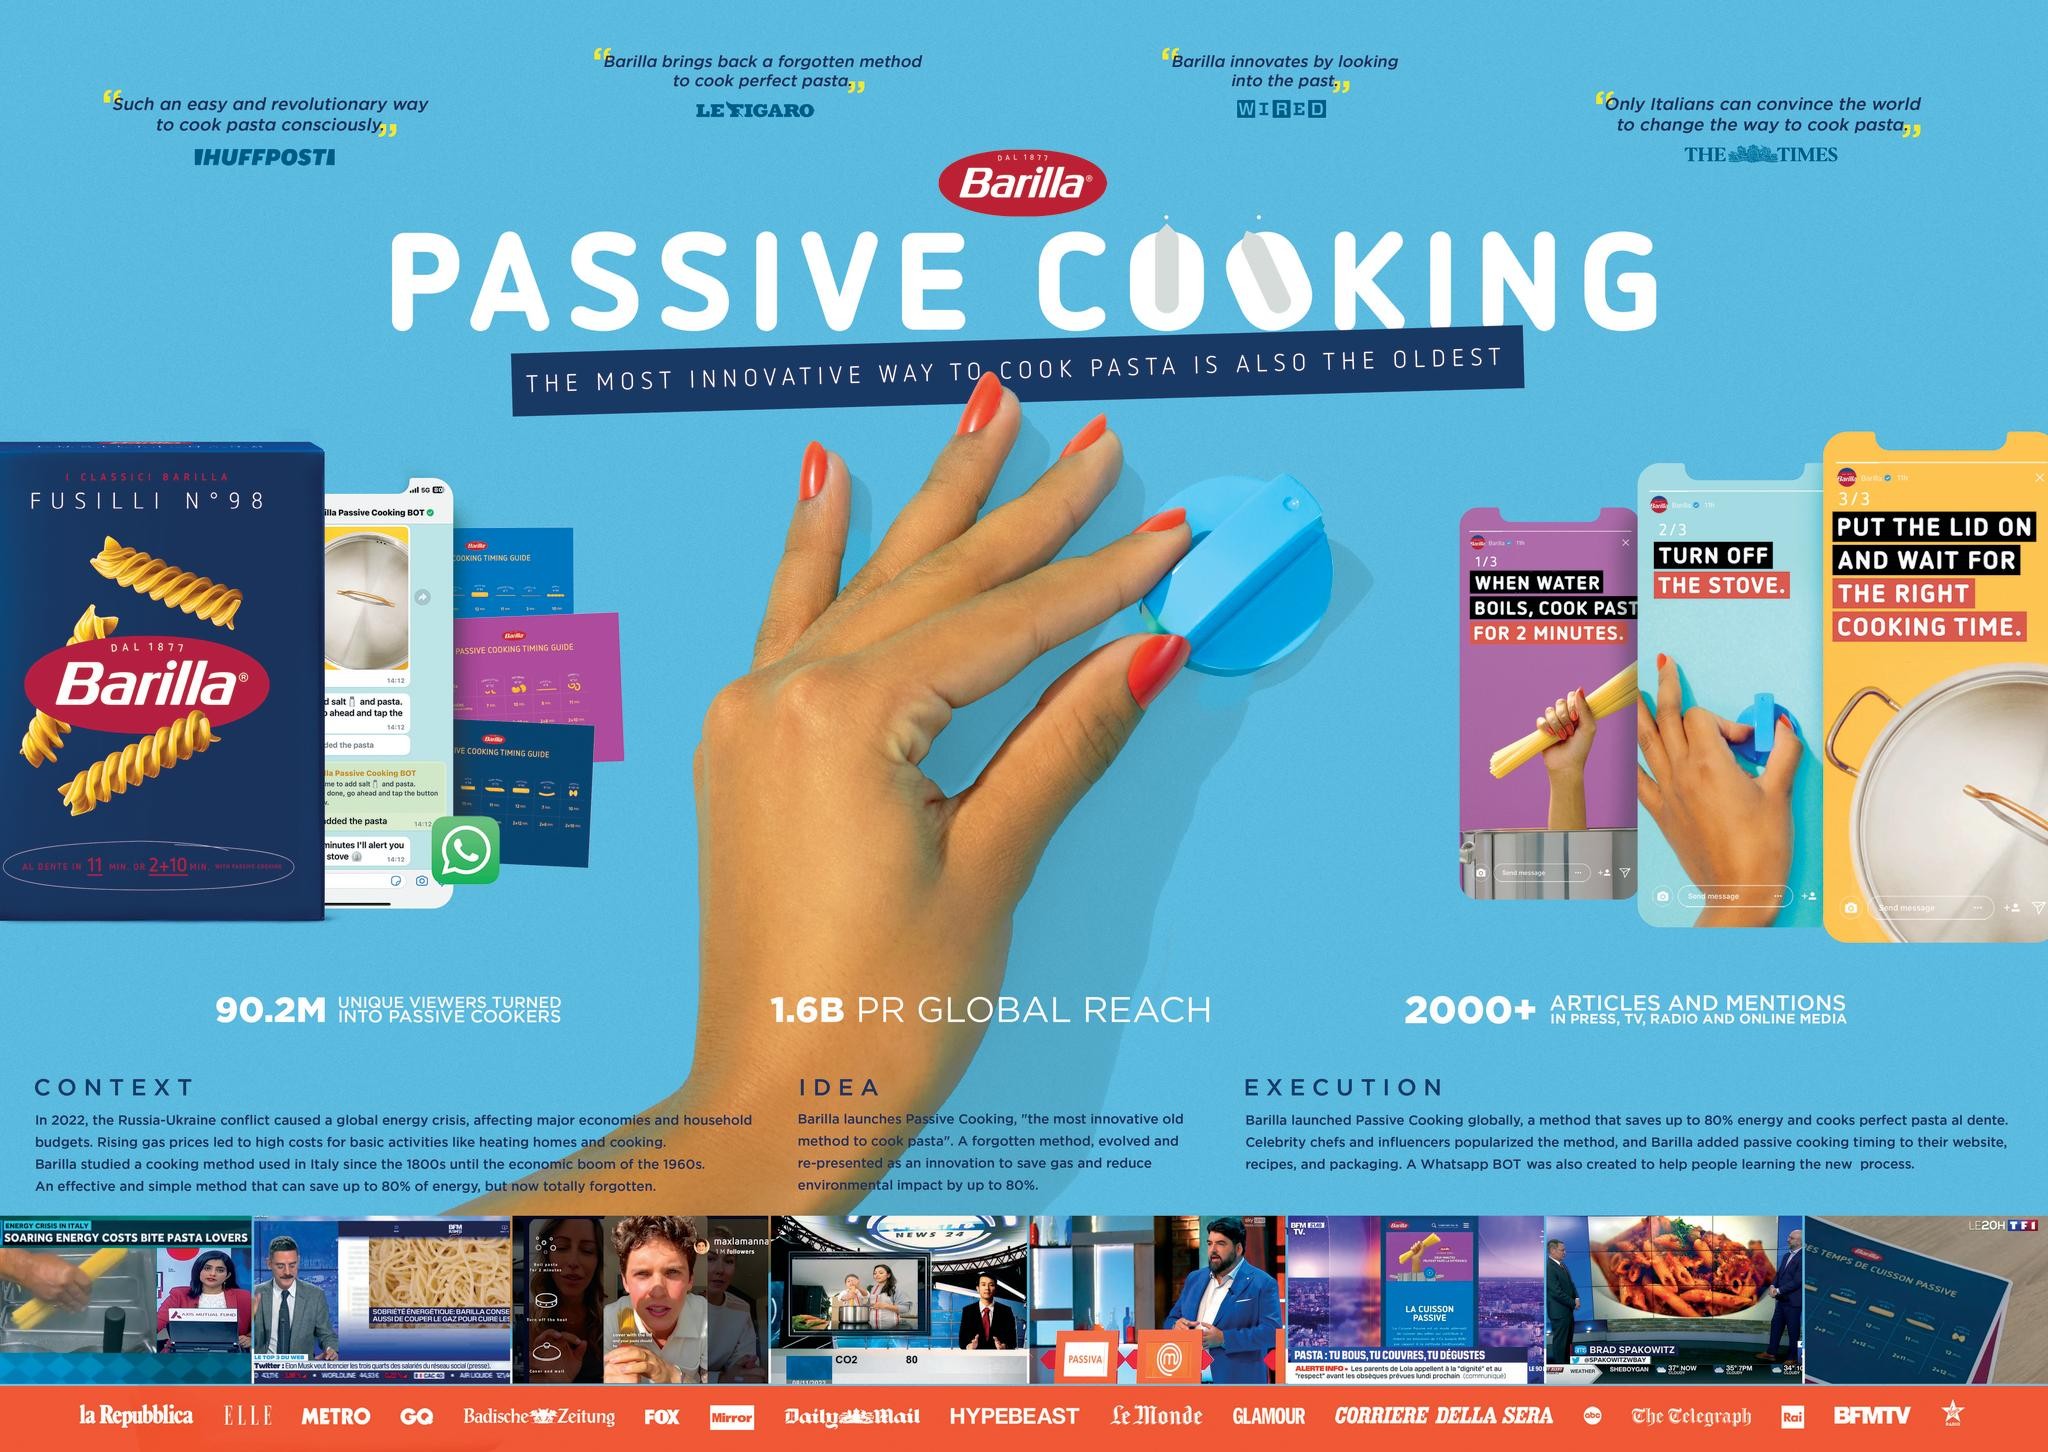 PASSIVE COOKING